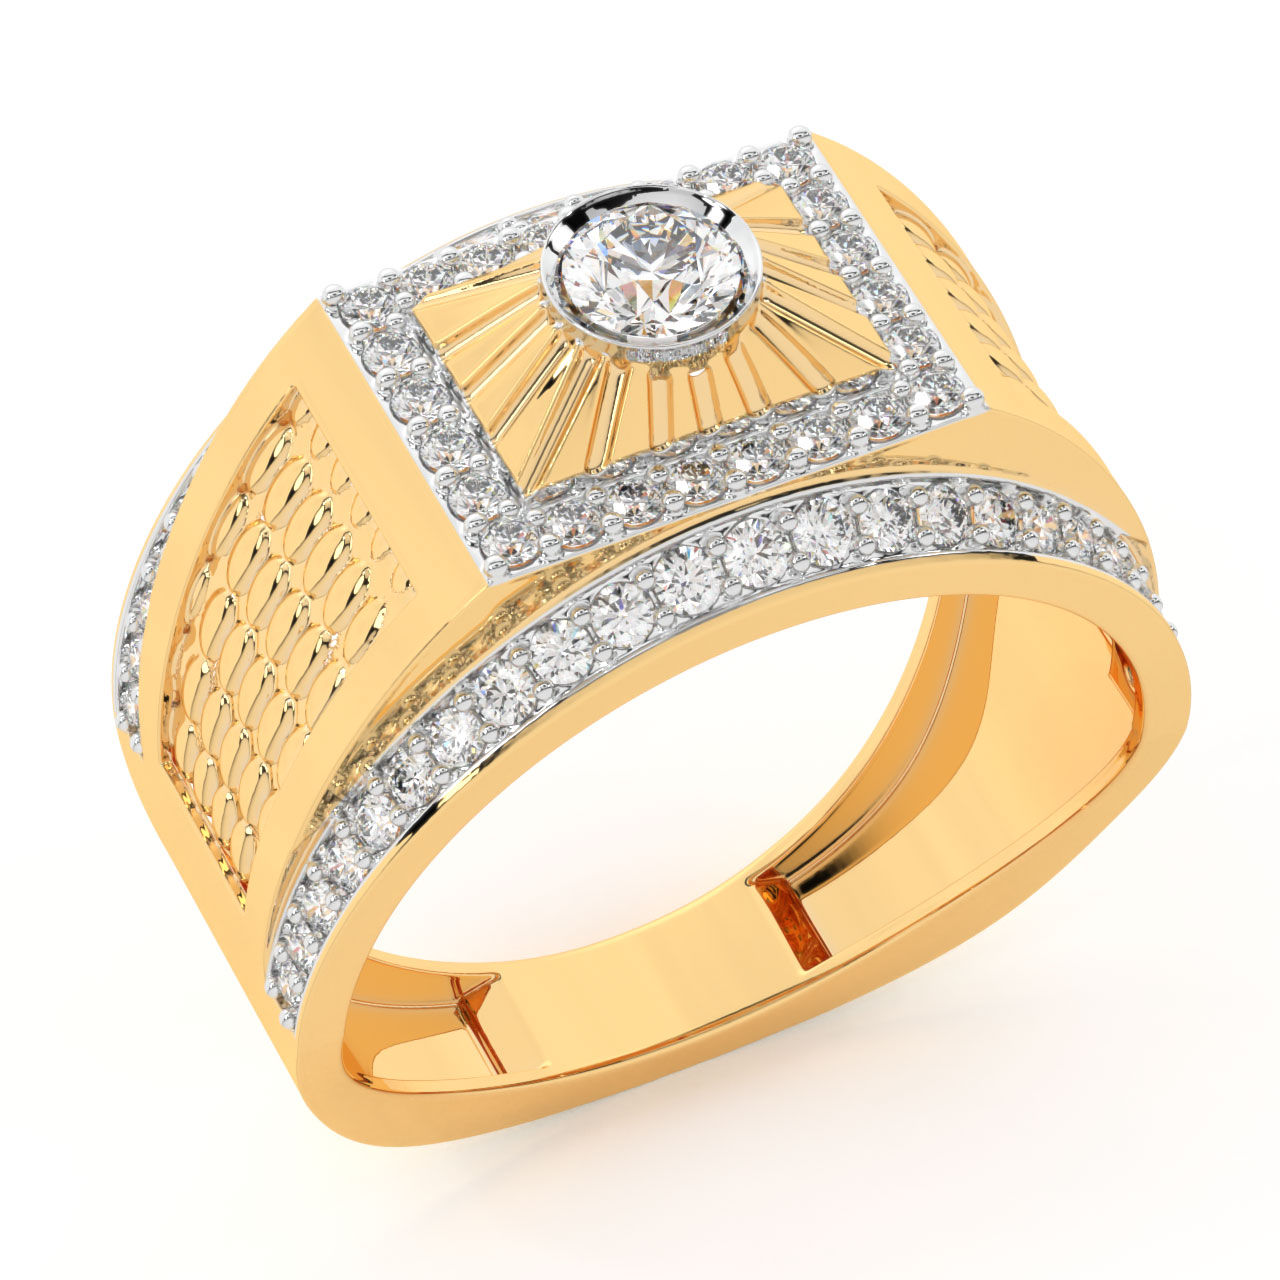 16 Gold Rings ideas | gold ring designs, gold jewelry fashion, gold jewelry  indian